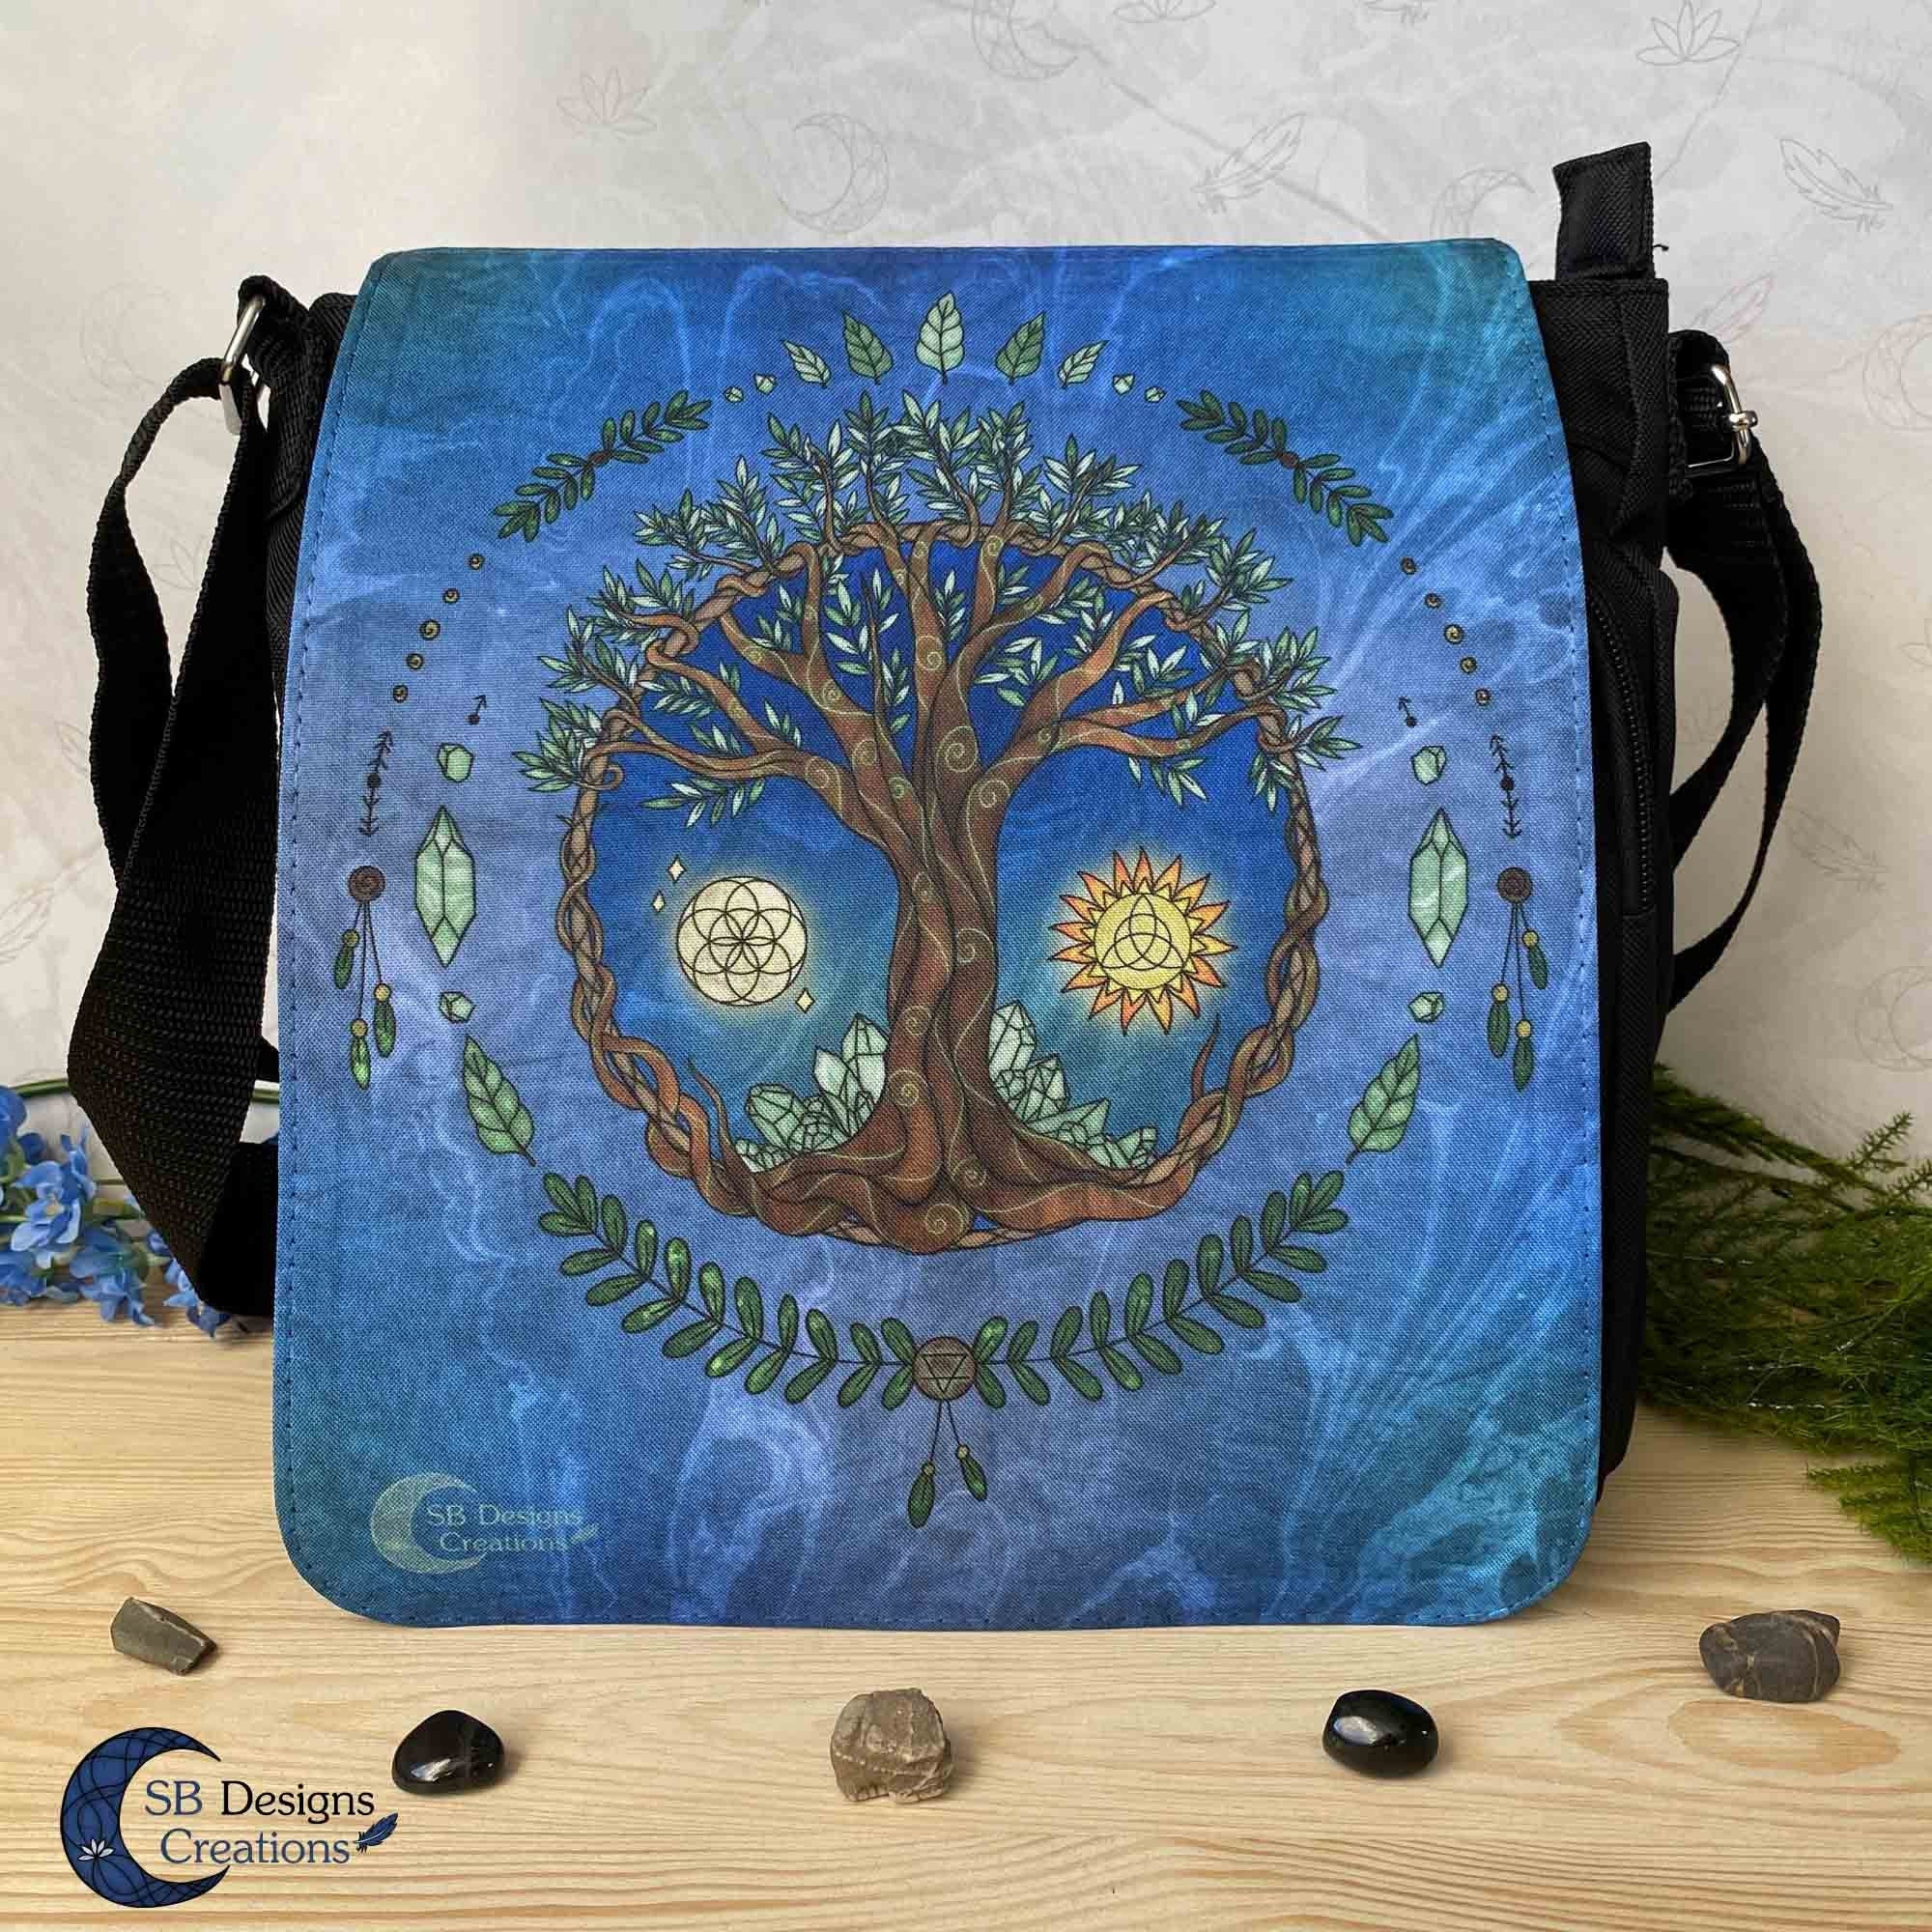 Canvas Tote Bag Green Tree of Life Created from Humanoid Shapes Colorful Durable Reusable Shopping Shoulder Grocery Bag